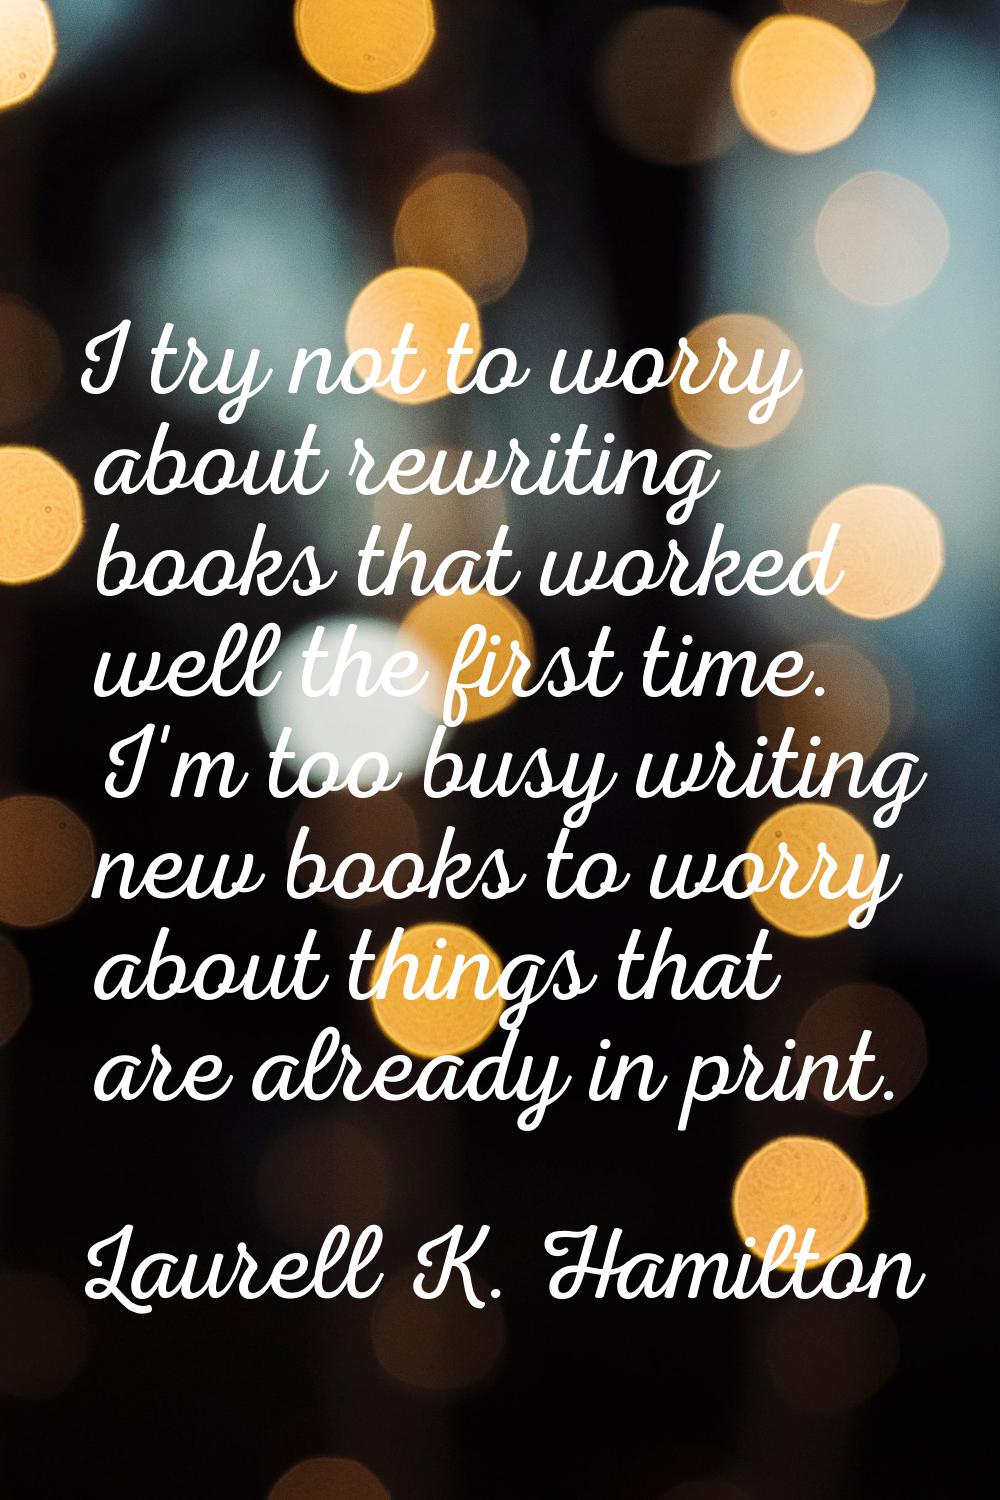 I try not to worry about rewriting books that worked well the first time. I'm too busy writing new 